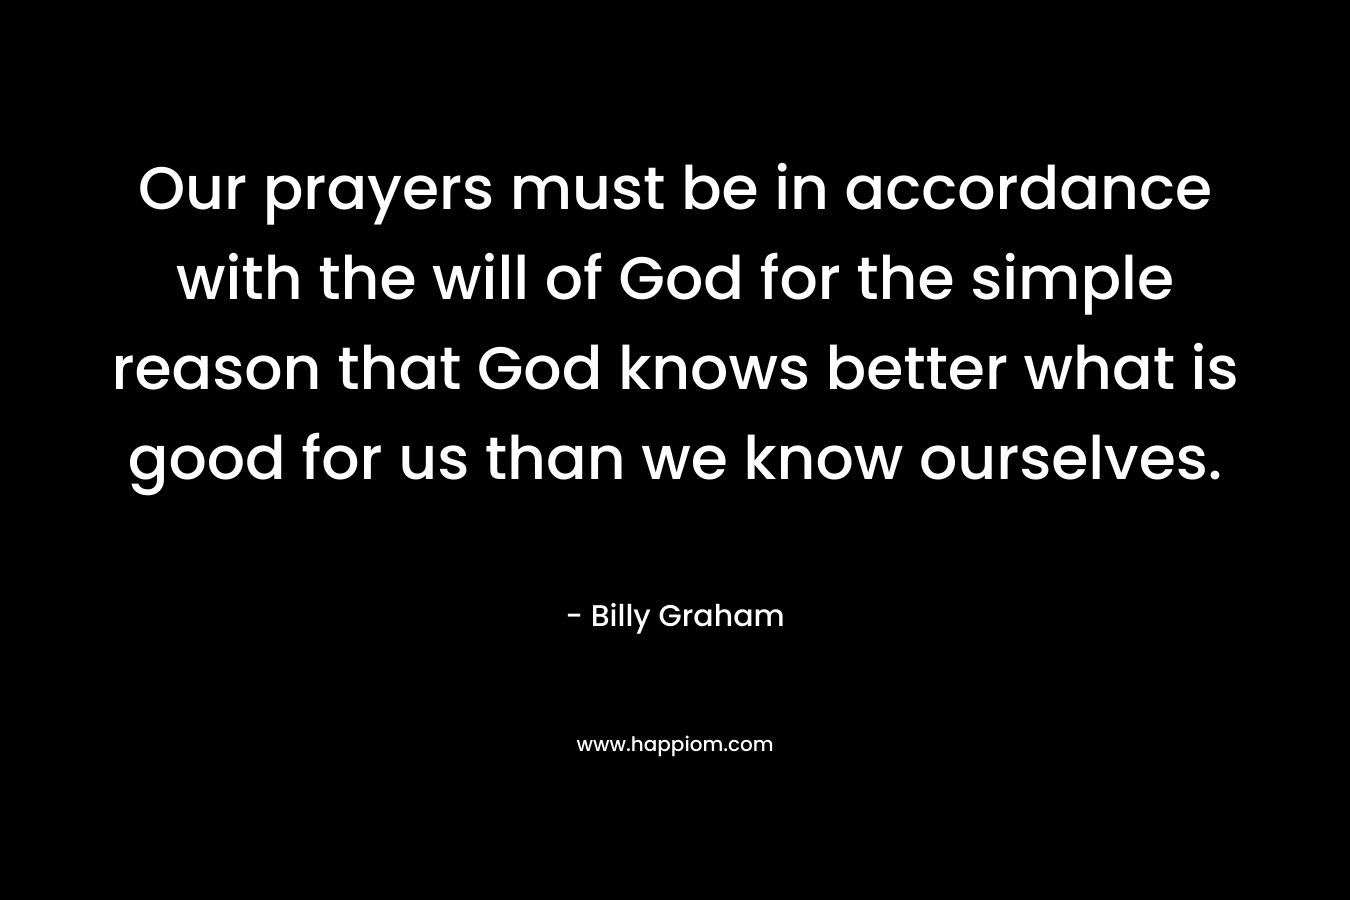 Our prayers must be in accordance with the will of God for the simple reason that God knows better what is good for us than we know ourselves.